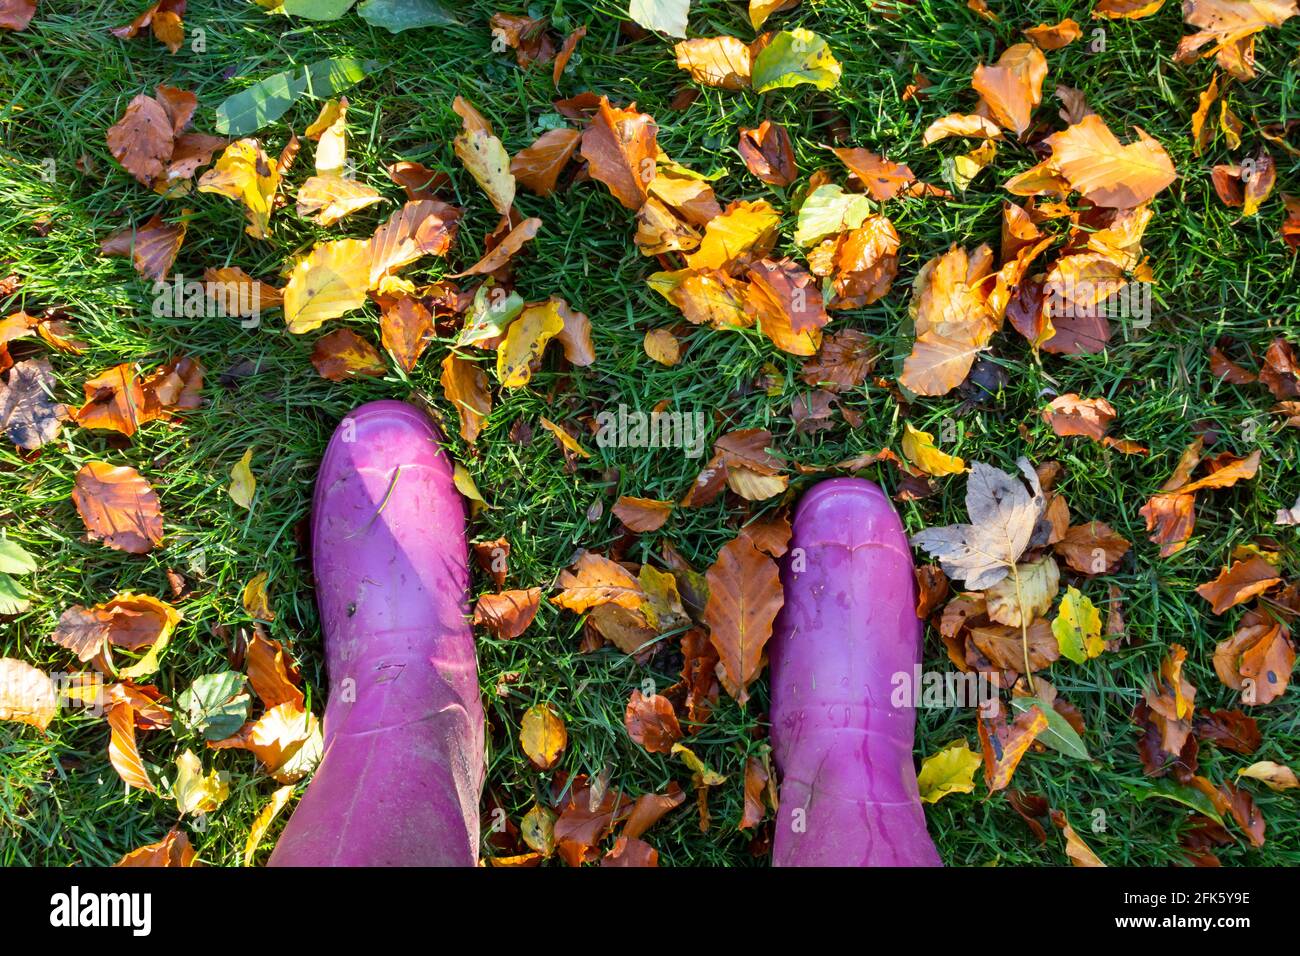 Feet wearing pink wellingtons standing on grass covered with fallen autumn leaves in Yorkshire, England. Stock Photo